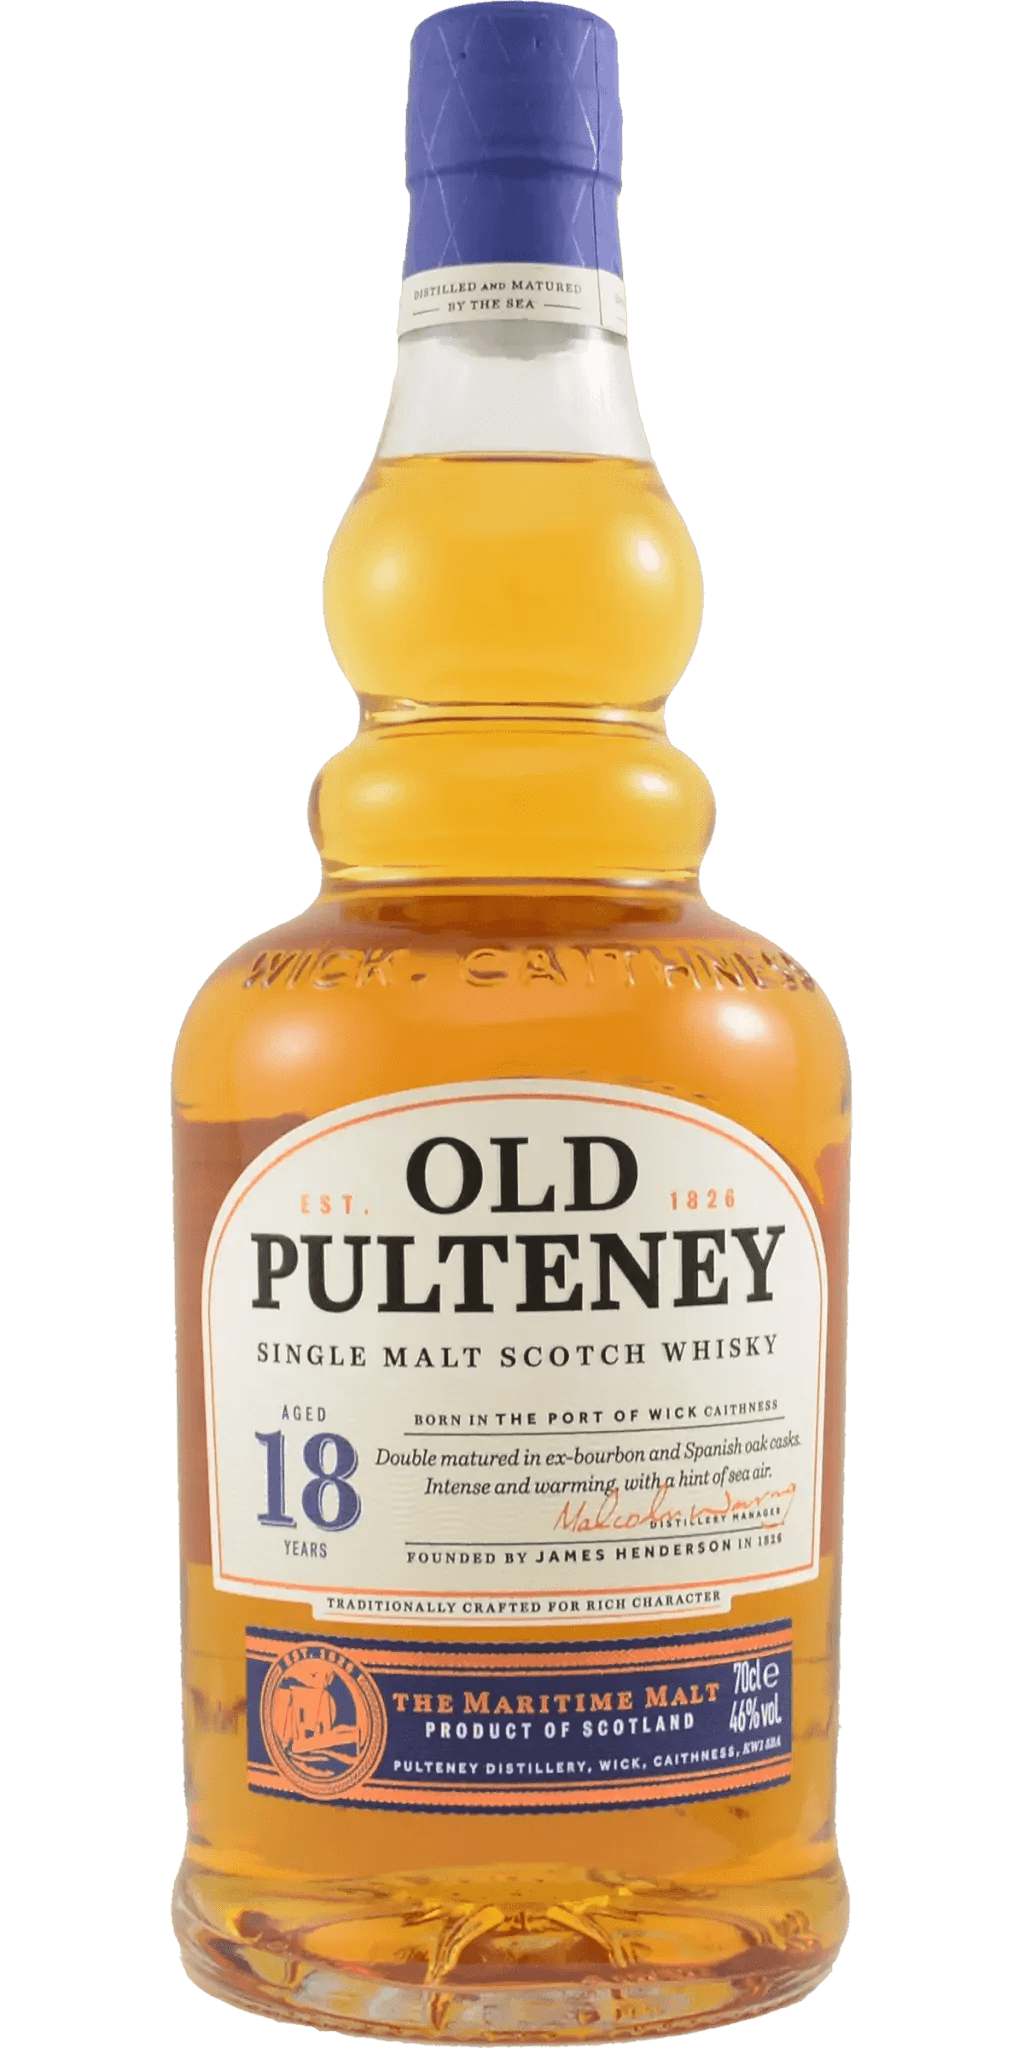 Old Pulteney 18 Year.webp__PID:2db60d29-8945-4367-92c3-c3fbeed5412f